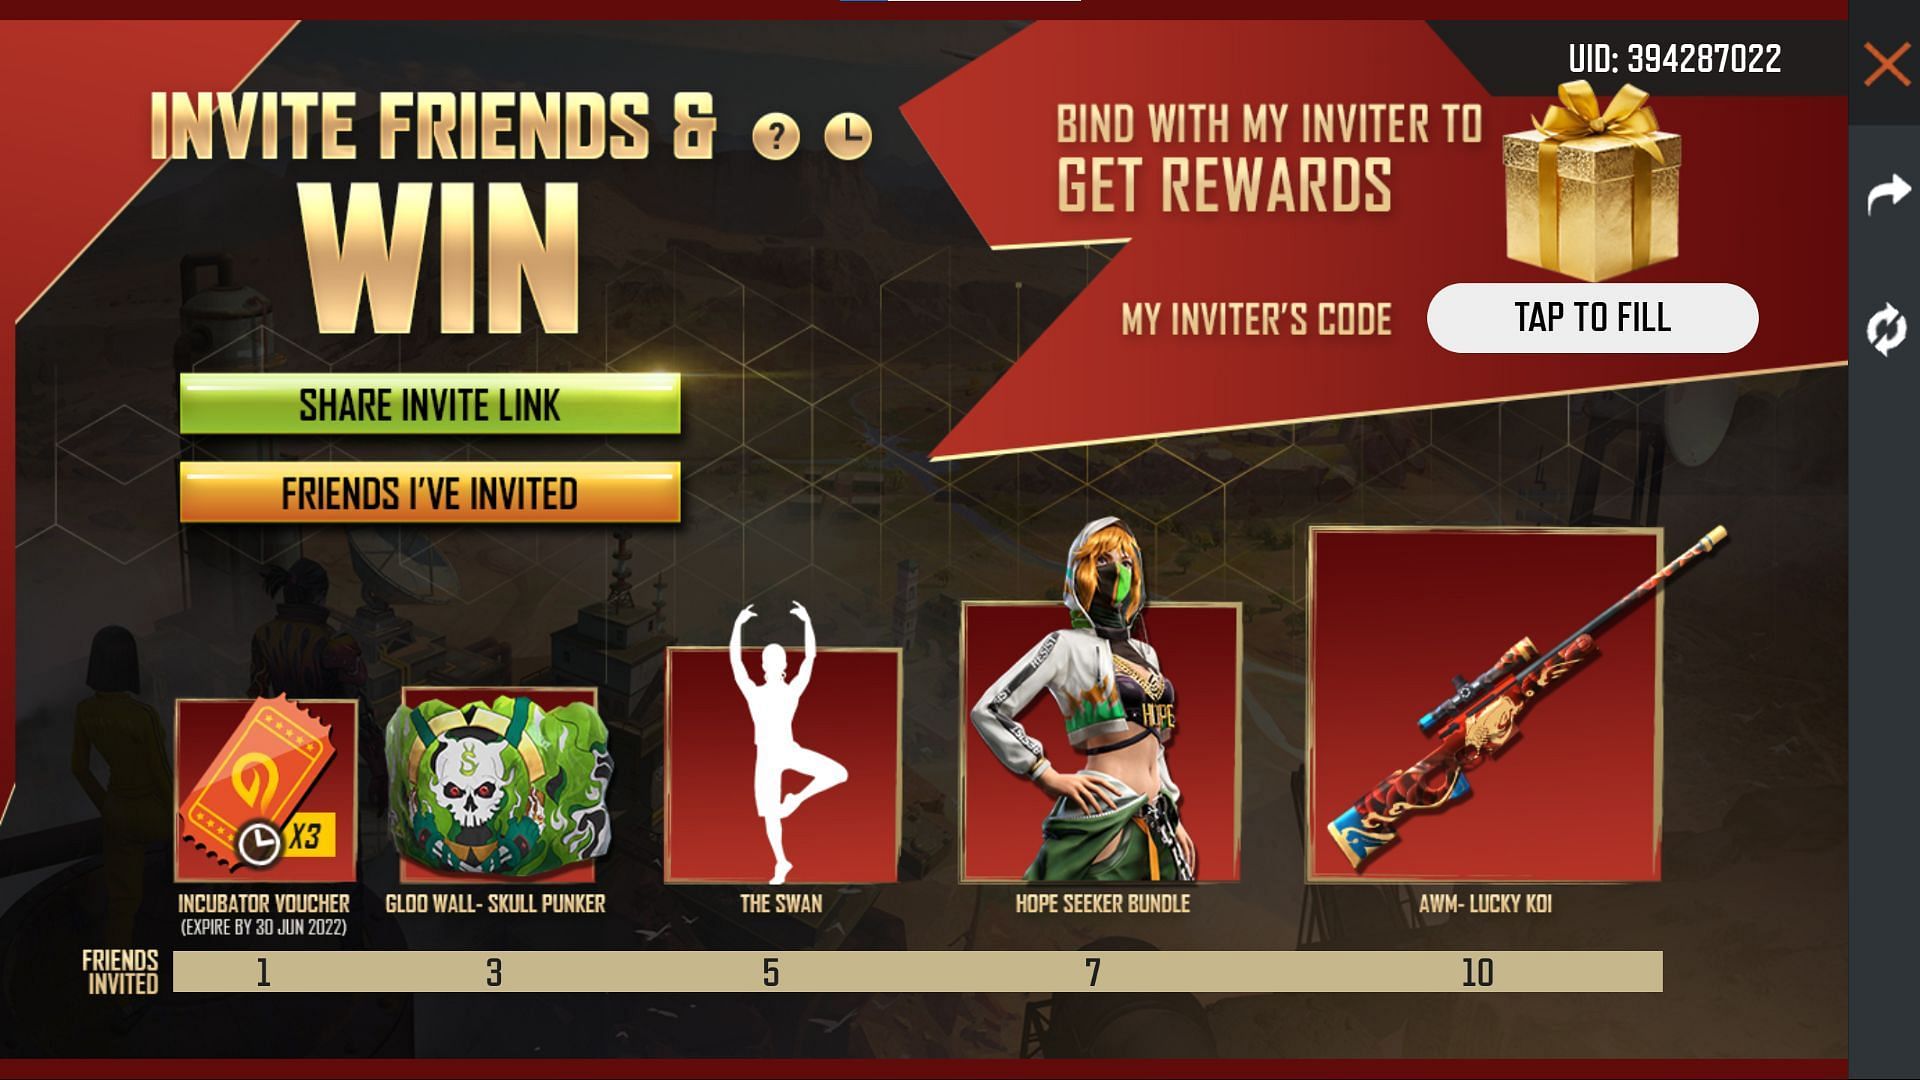 Gamers have to complete these milestones to get free rewards (Image via Garena)